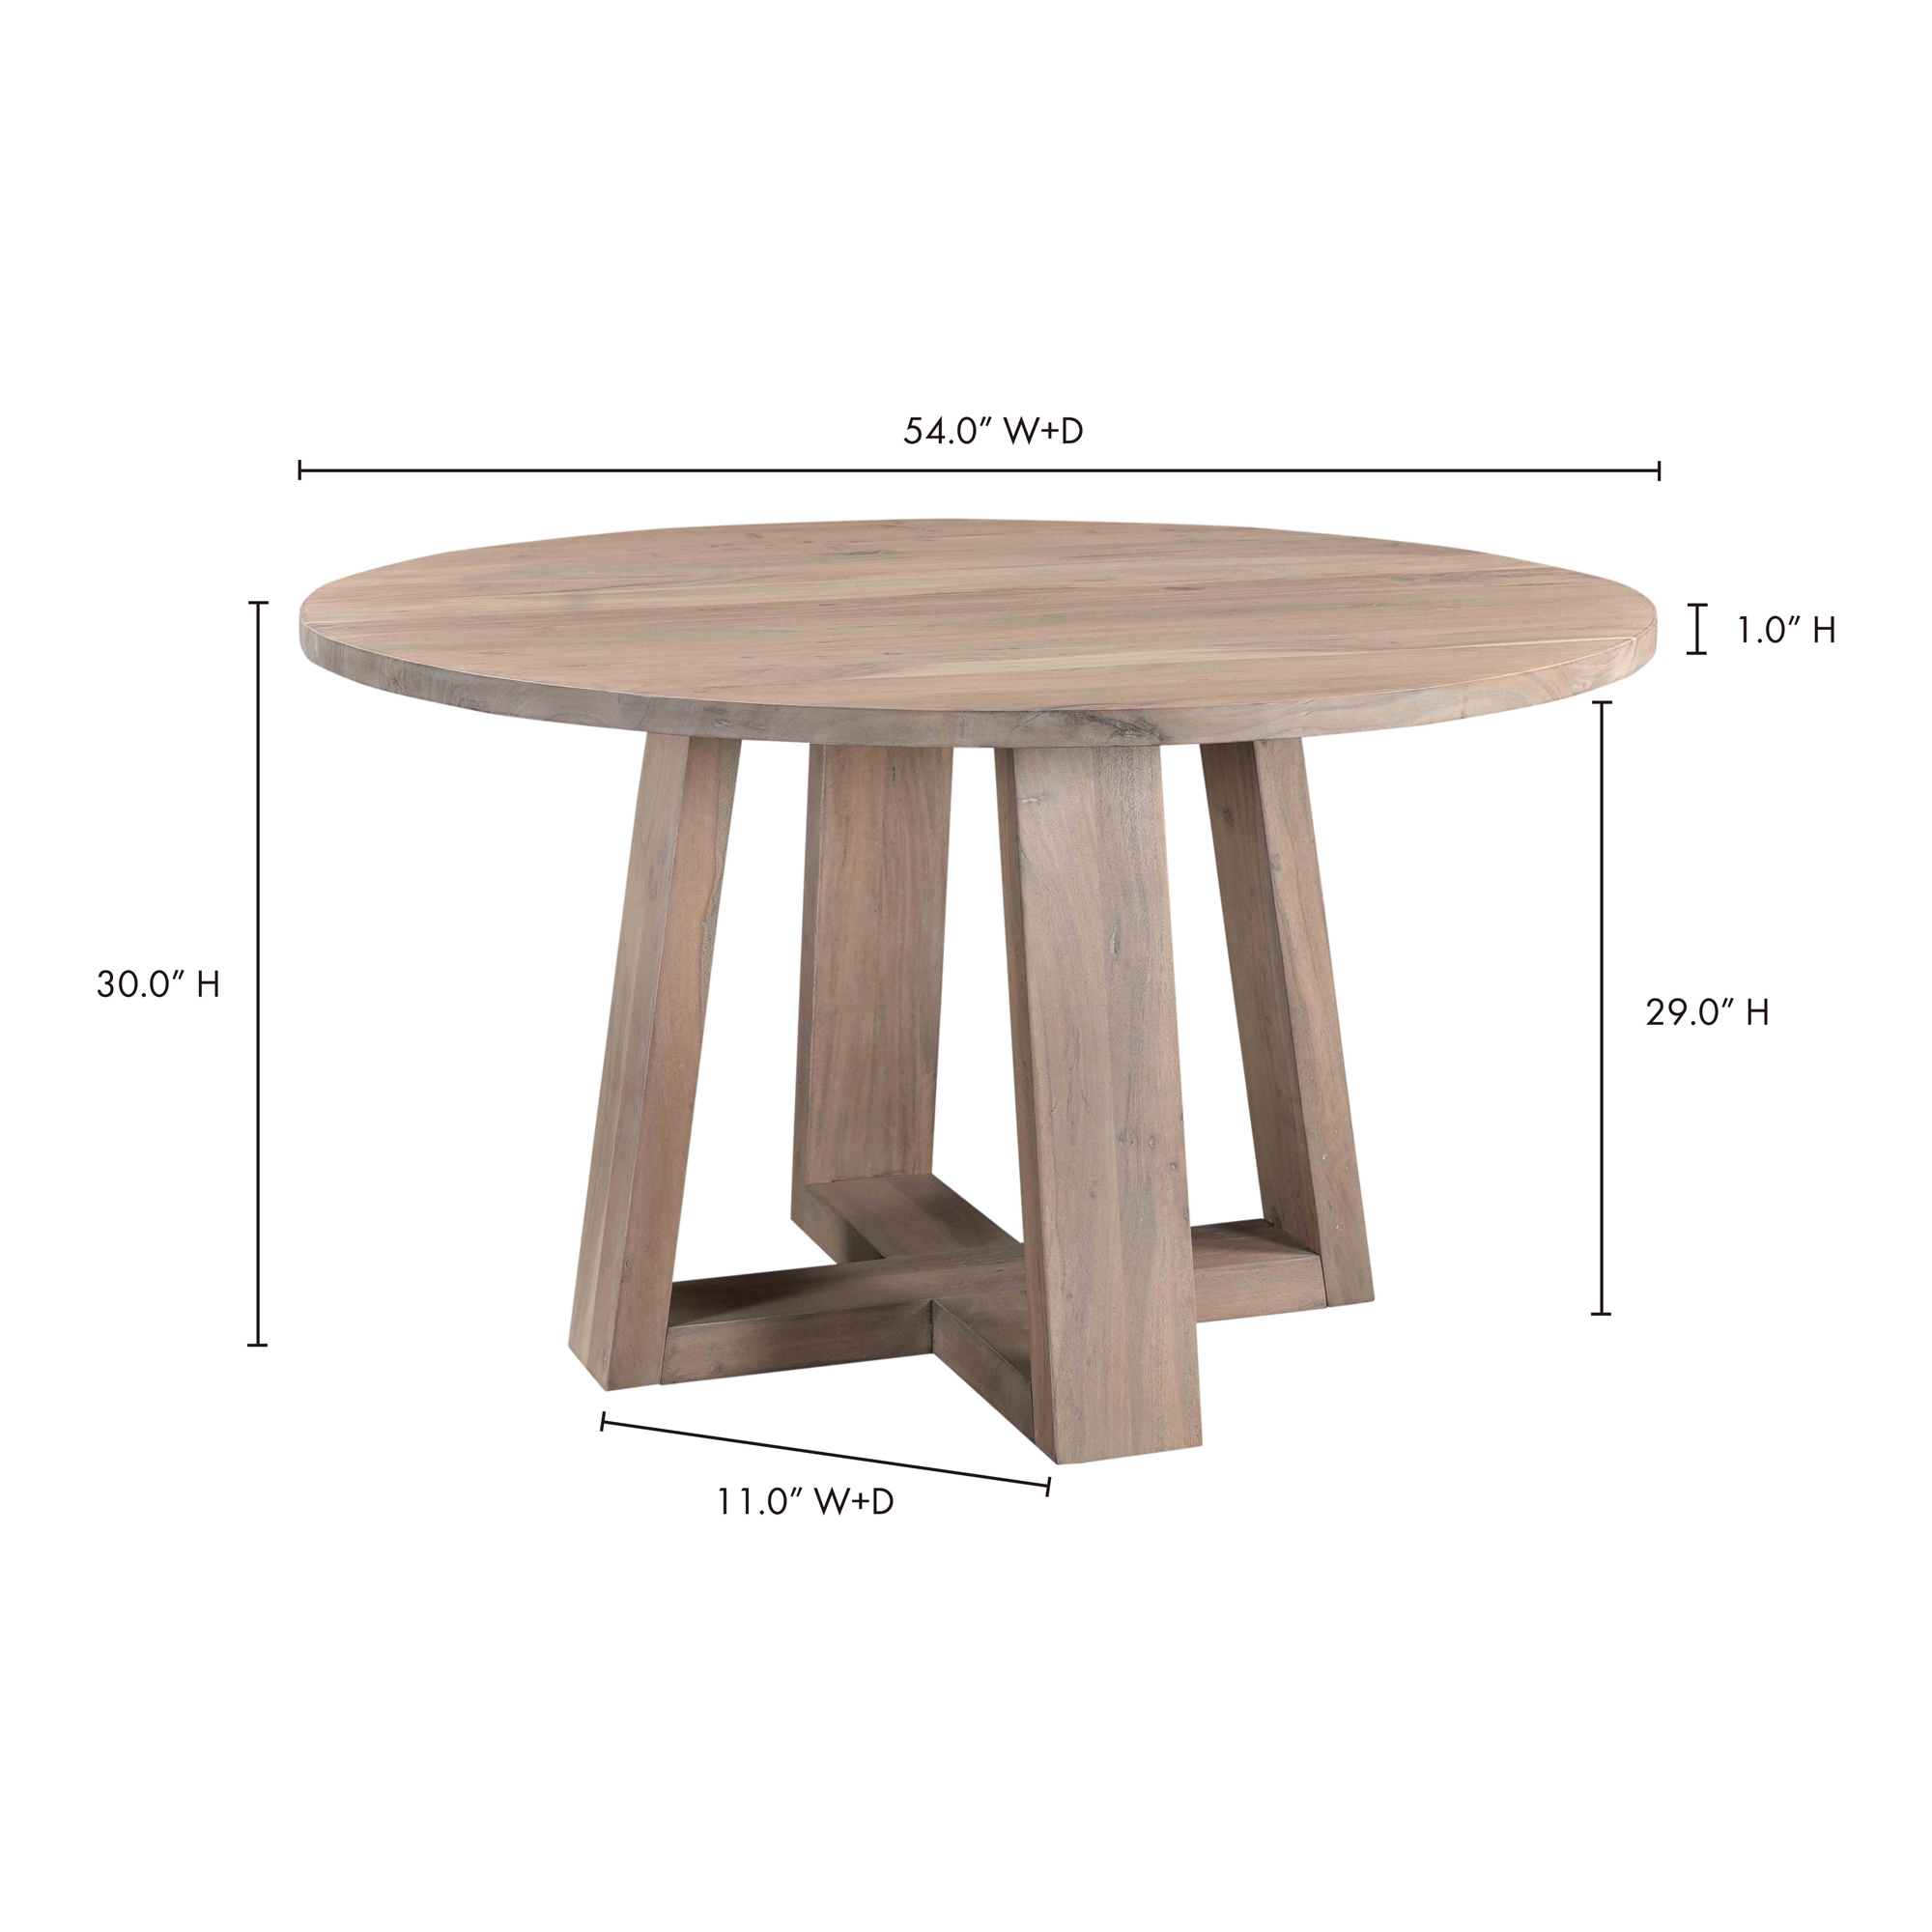 Tanya Round Dining Table - Image 6